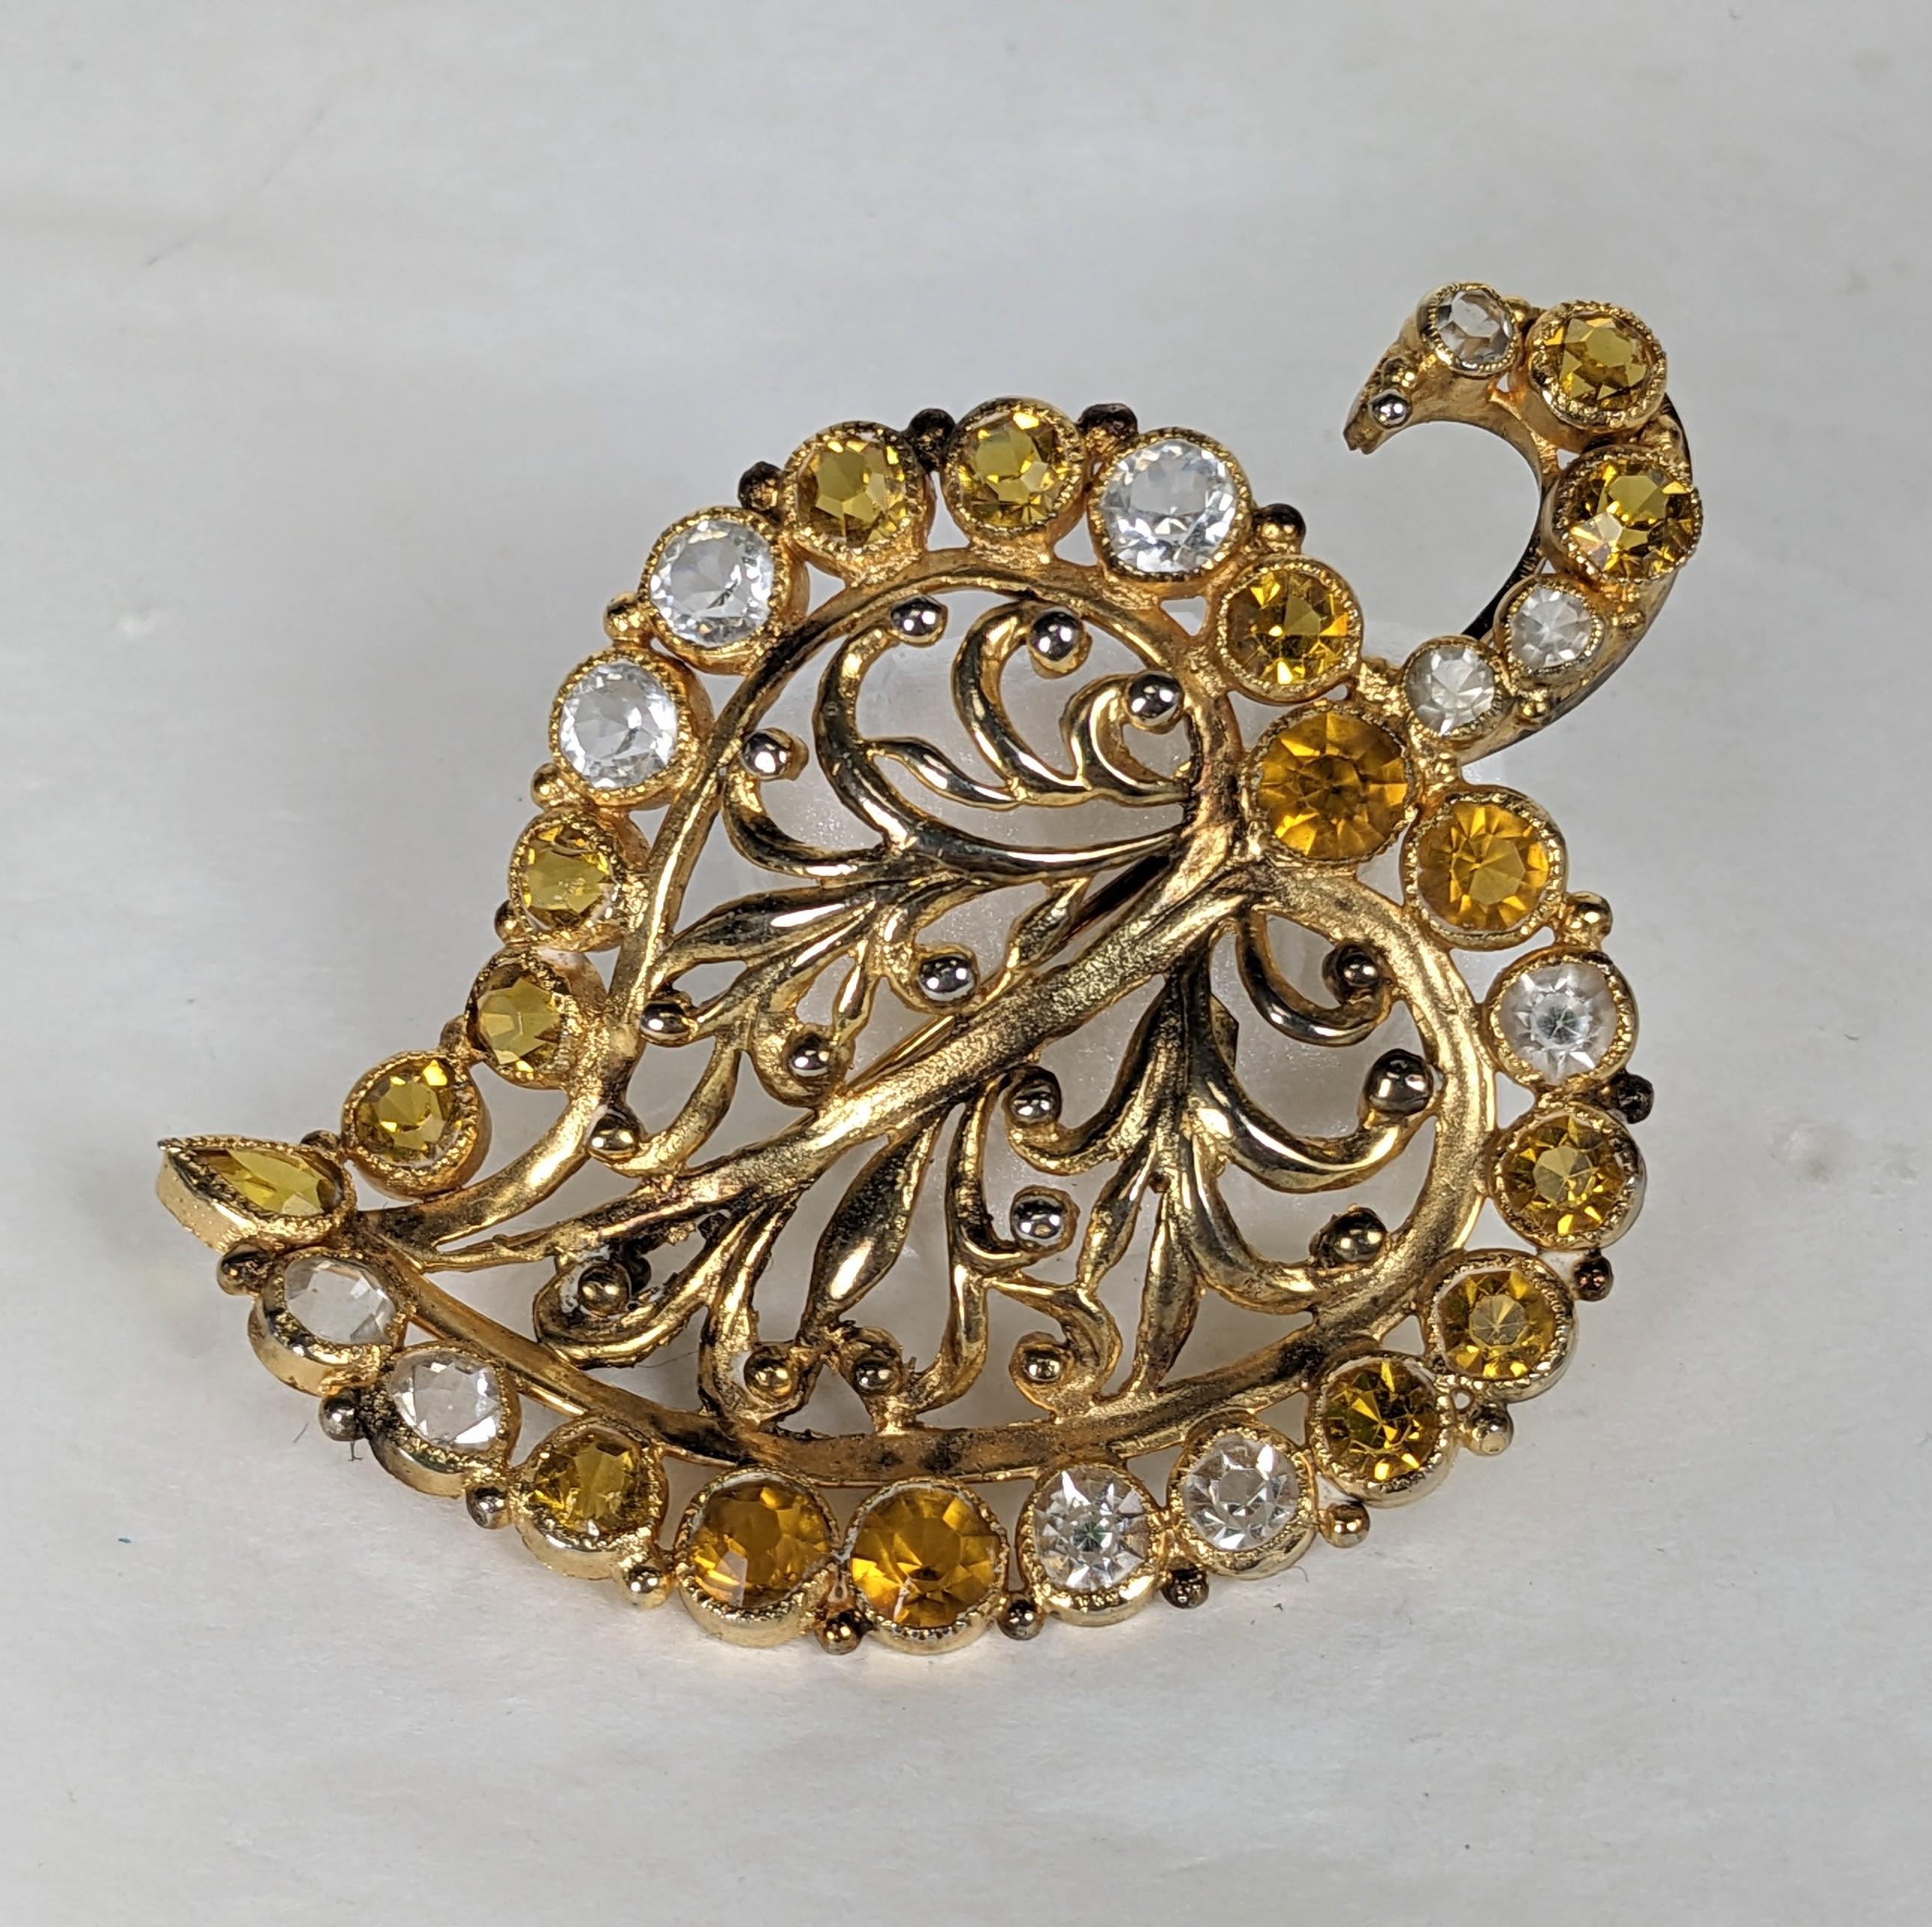 Elegant Hobe leaf brooch of gilt plate bronze and brass metal with collet set vari shaped faceted crystals in clear and citrine tones. The leaf's center made of delicate pierced work of gilt foliate motifs. Excellent Condition, Signed Hobe. Length 2